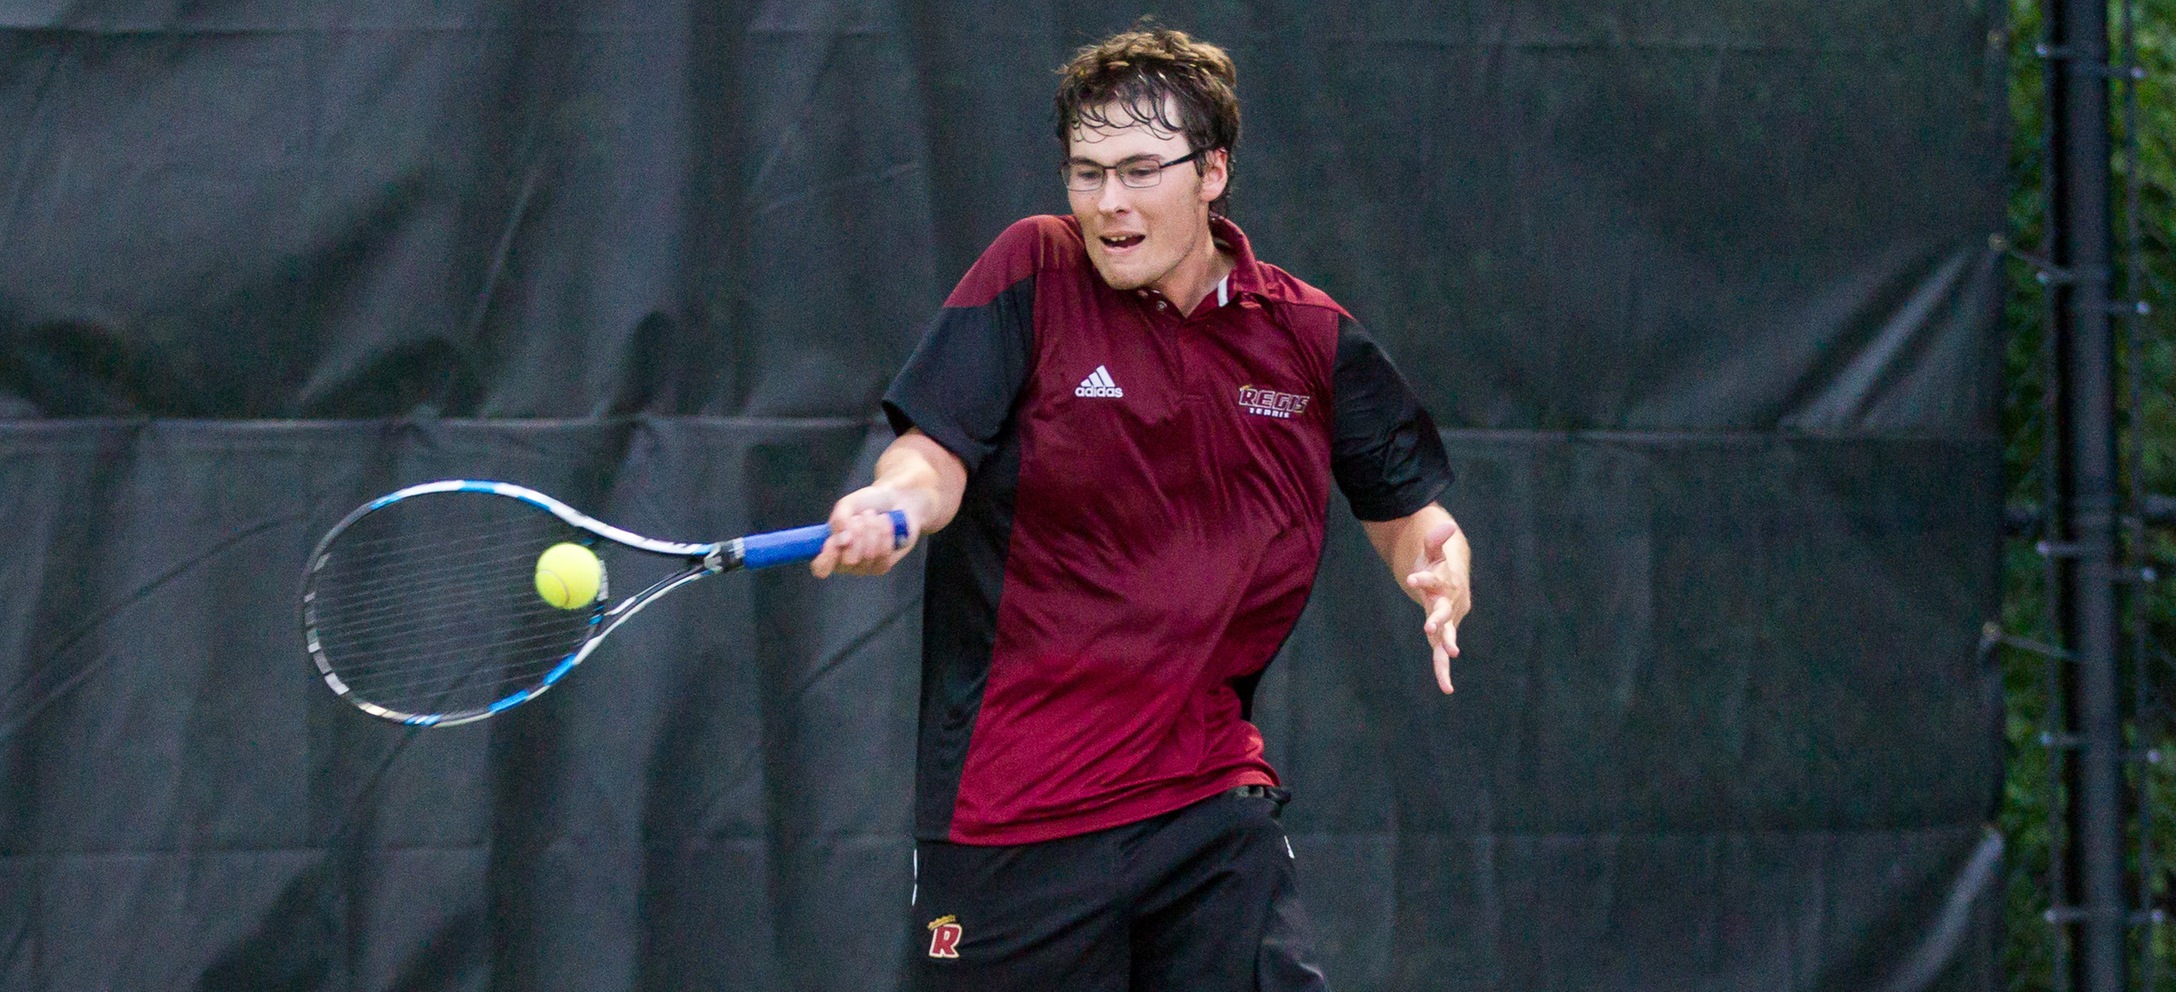 Men's Tennis Downs Emerson for First Win